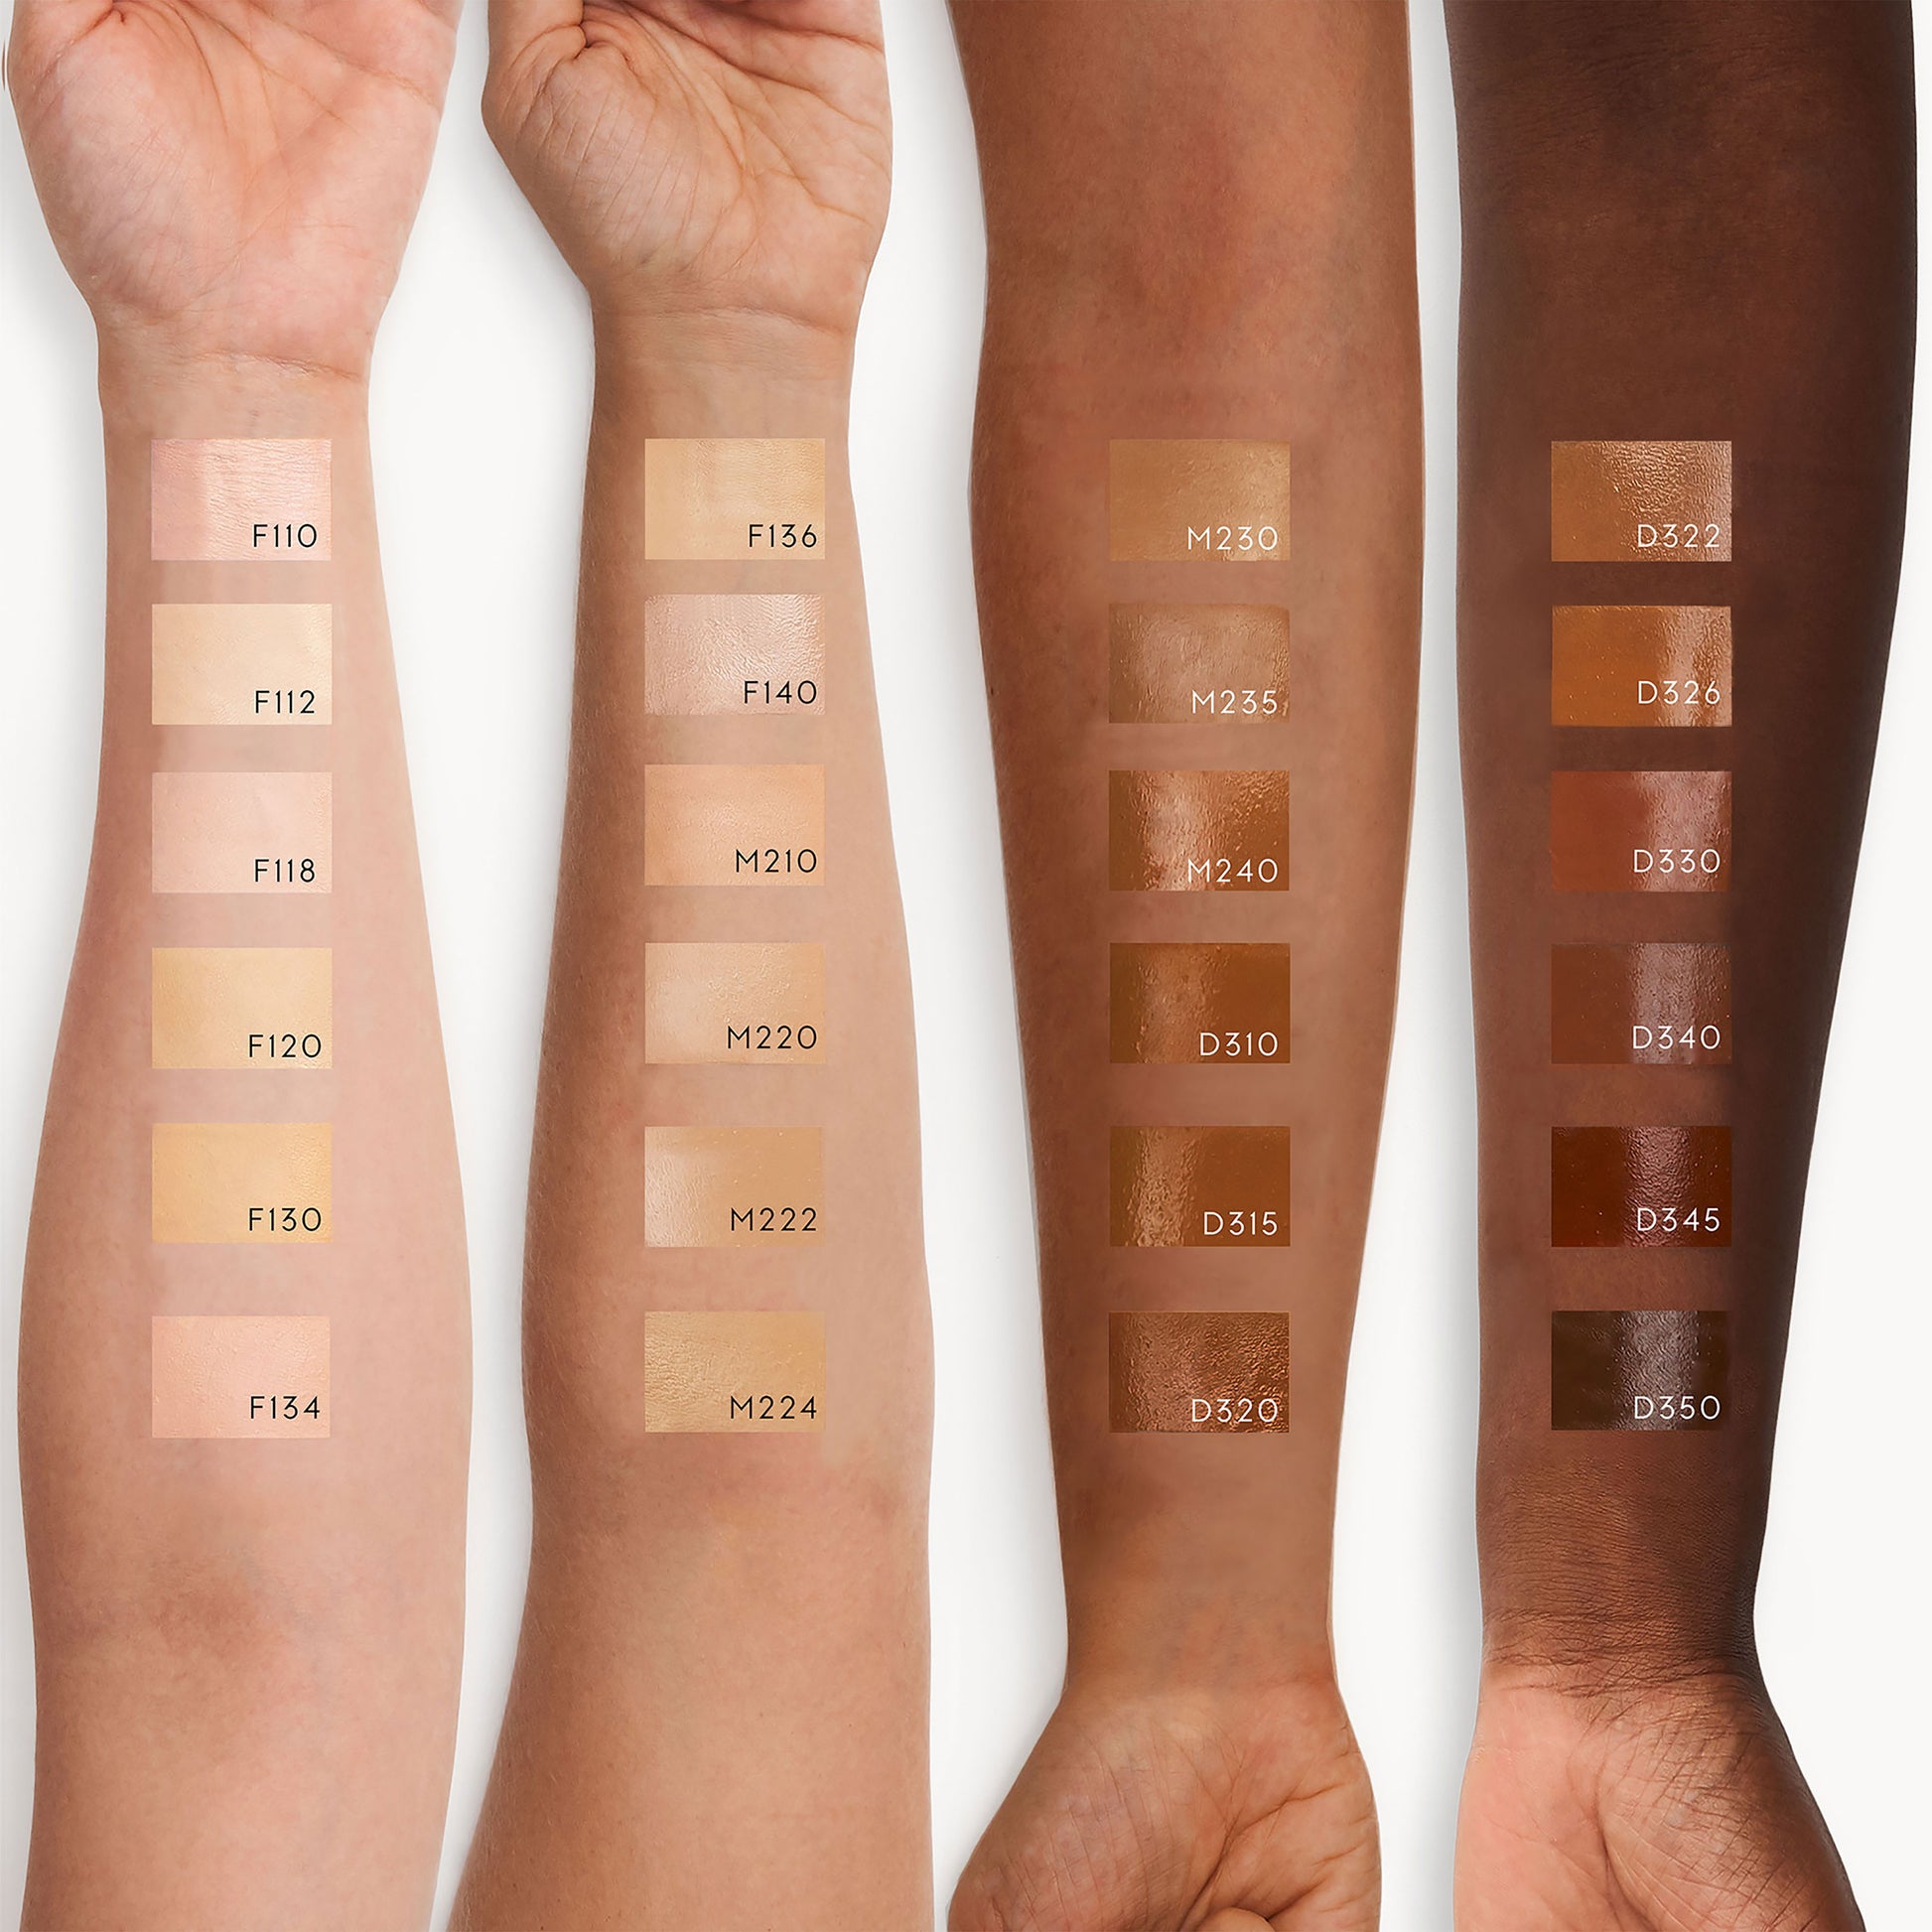 four arms of different skin tones all with a swatch of cream foundation from darkest to lightest shade. d322 is the lightest shade on the deepest skin tone.  